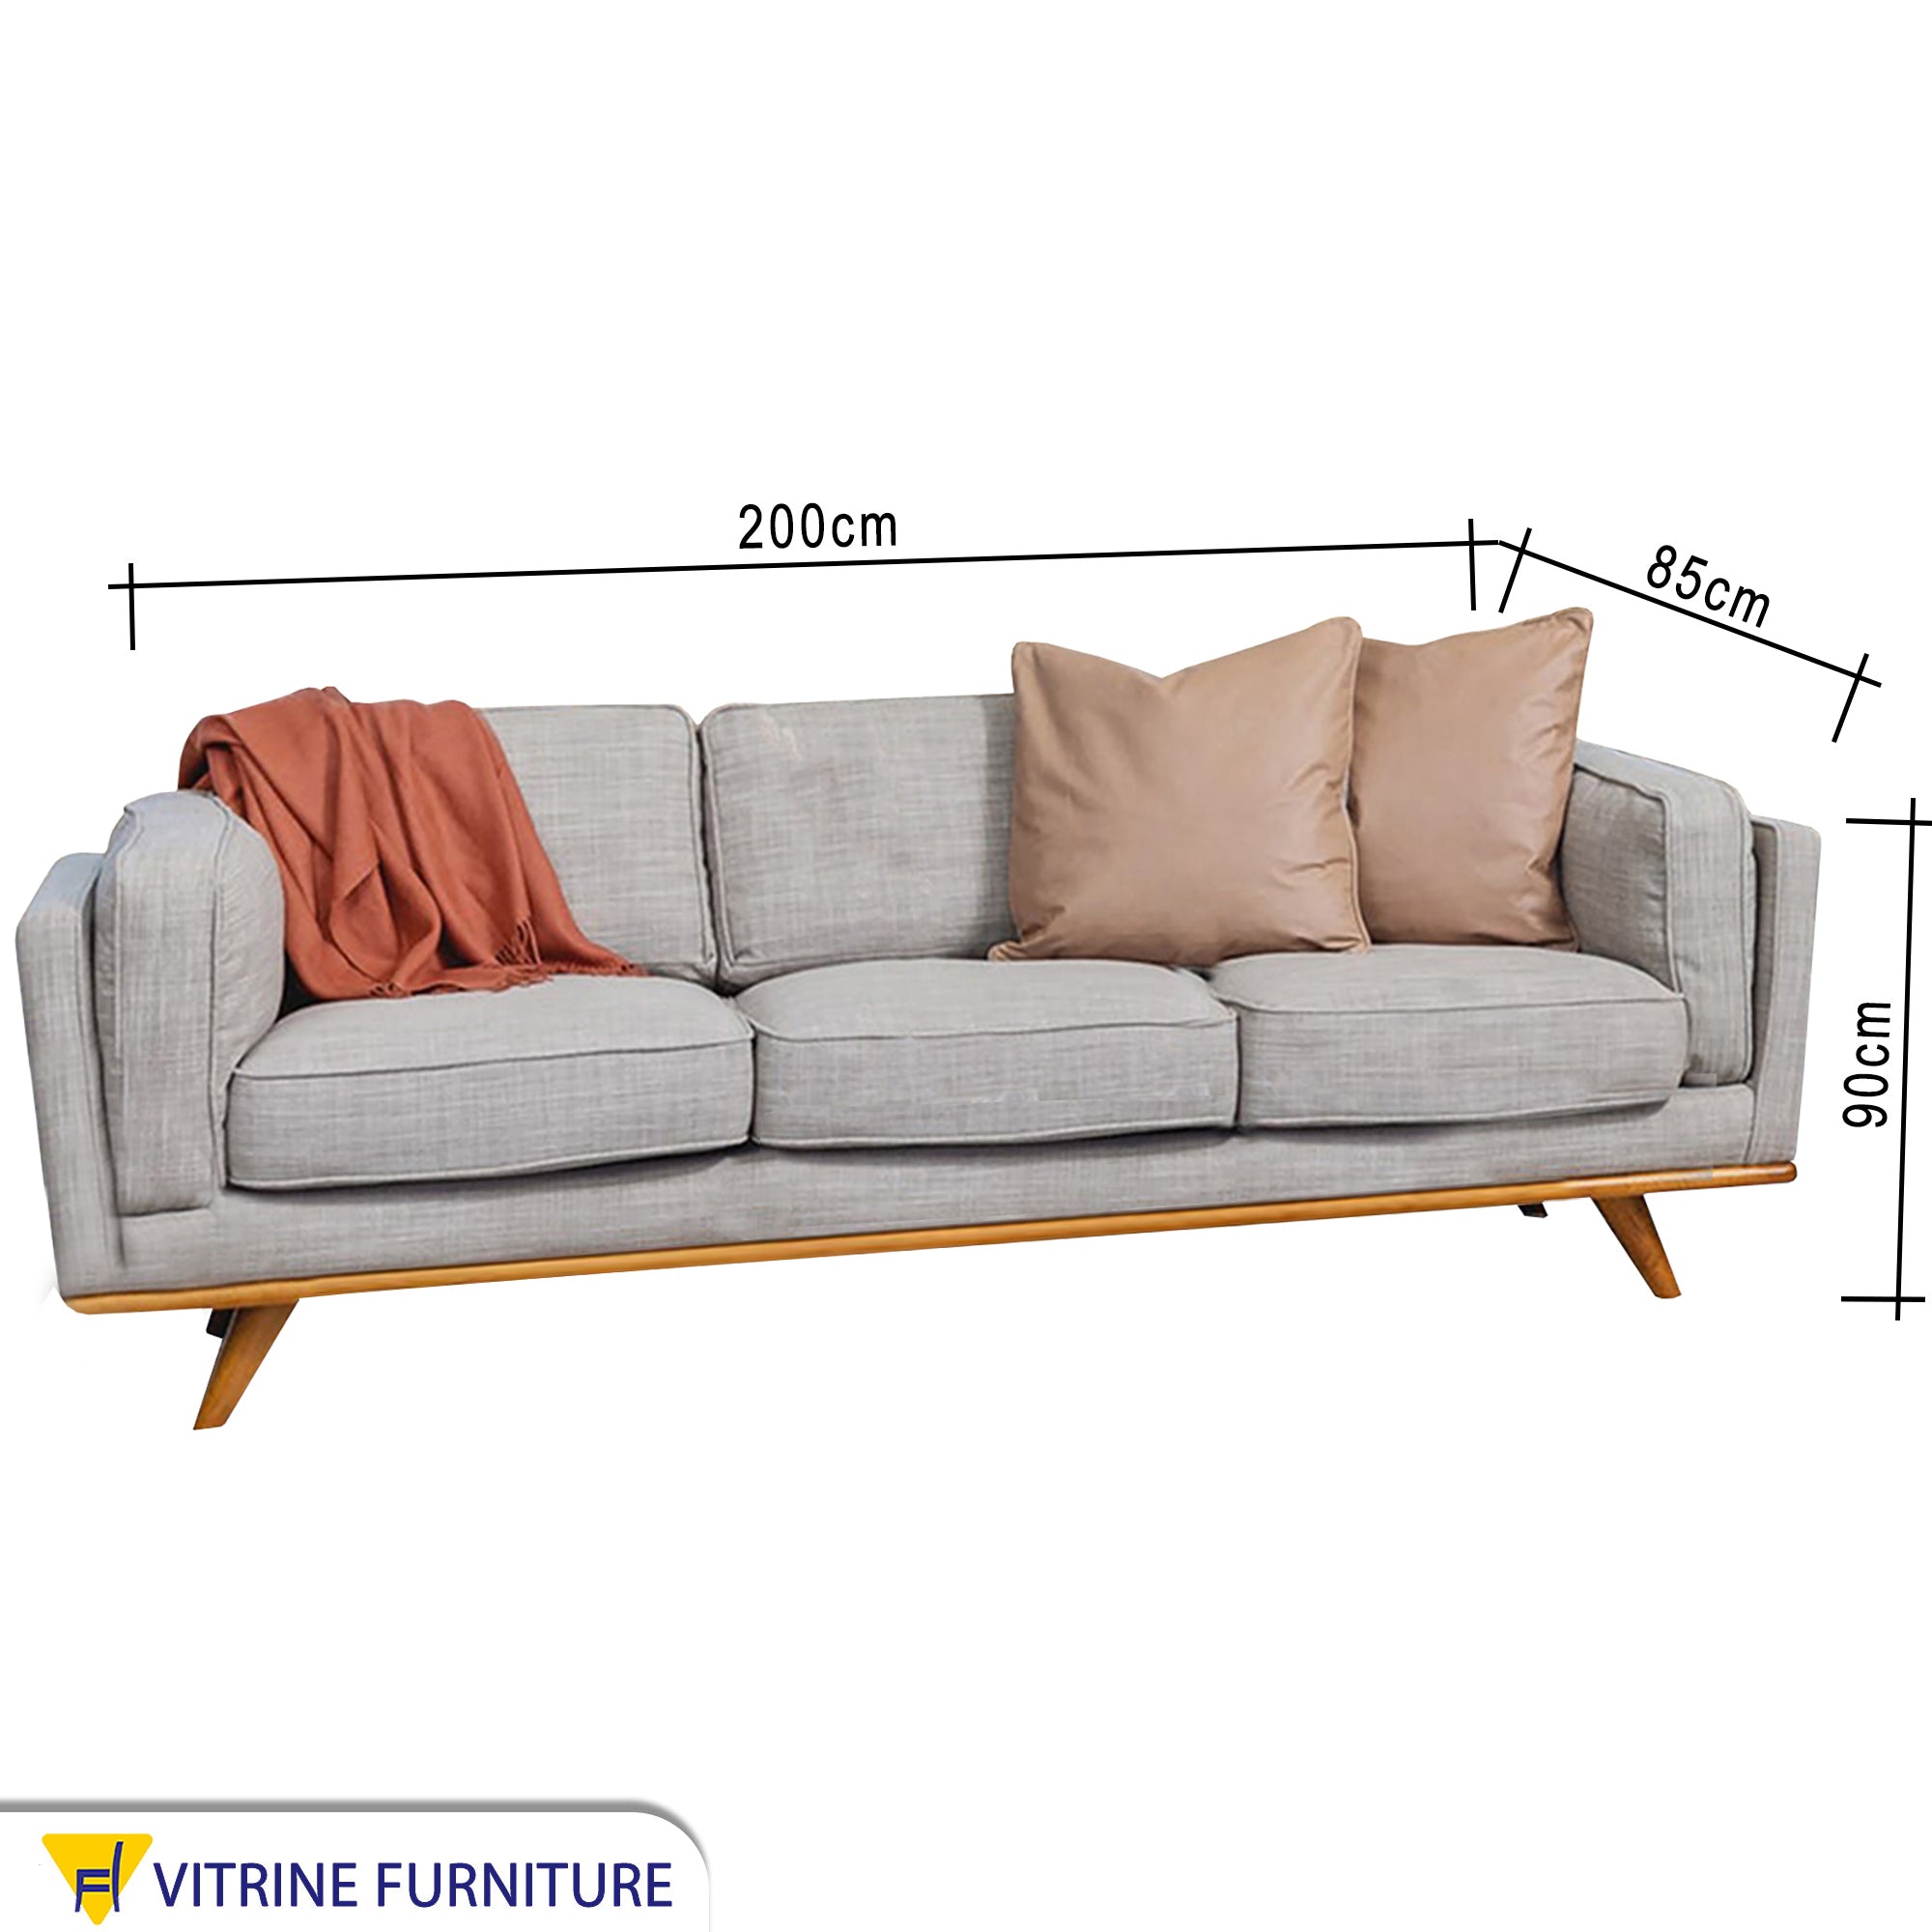 Sofa with armrests and short back in gray color